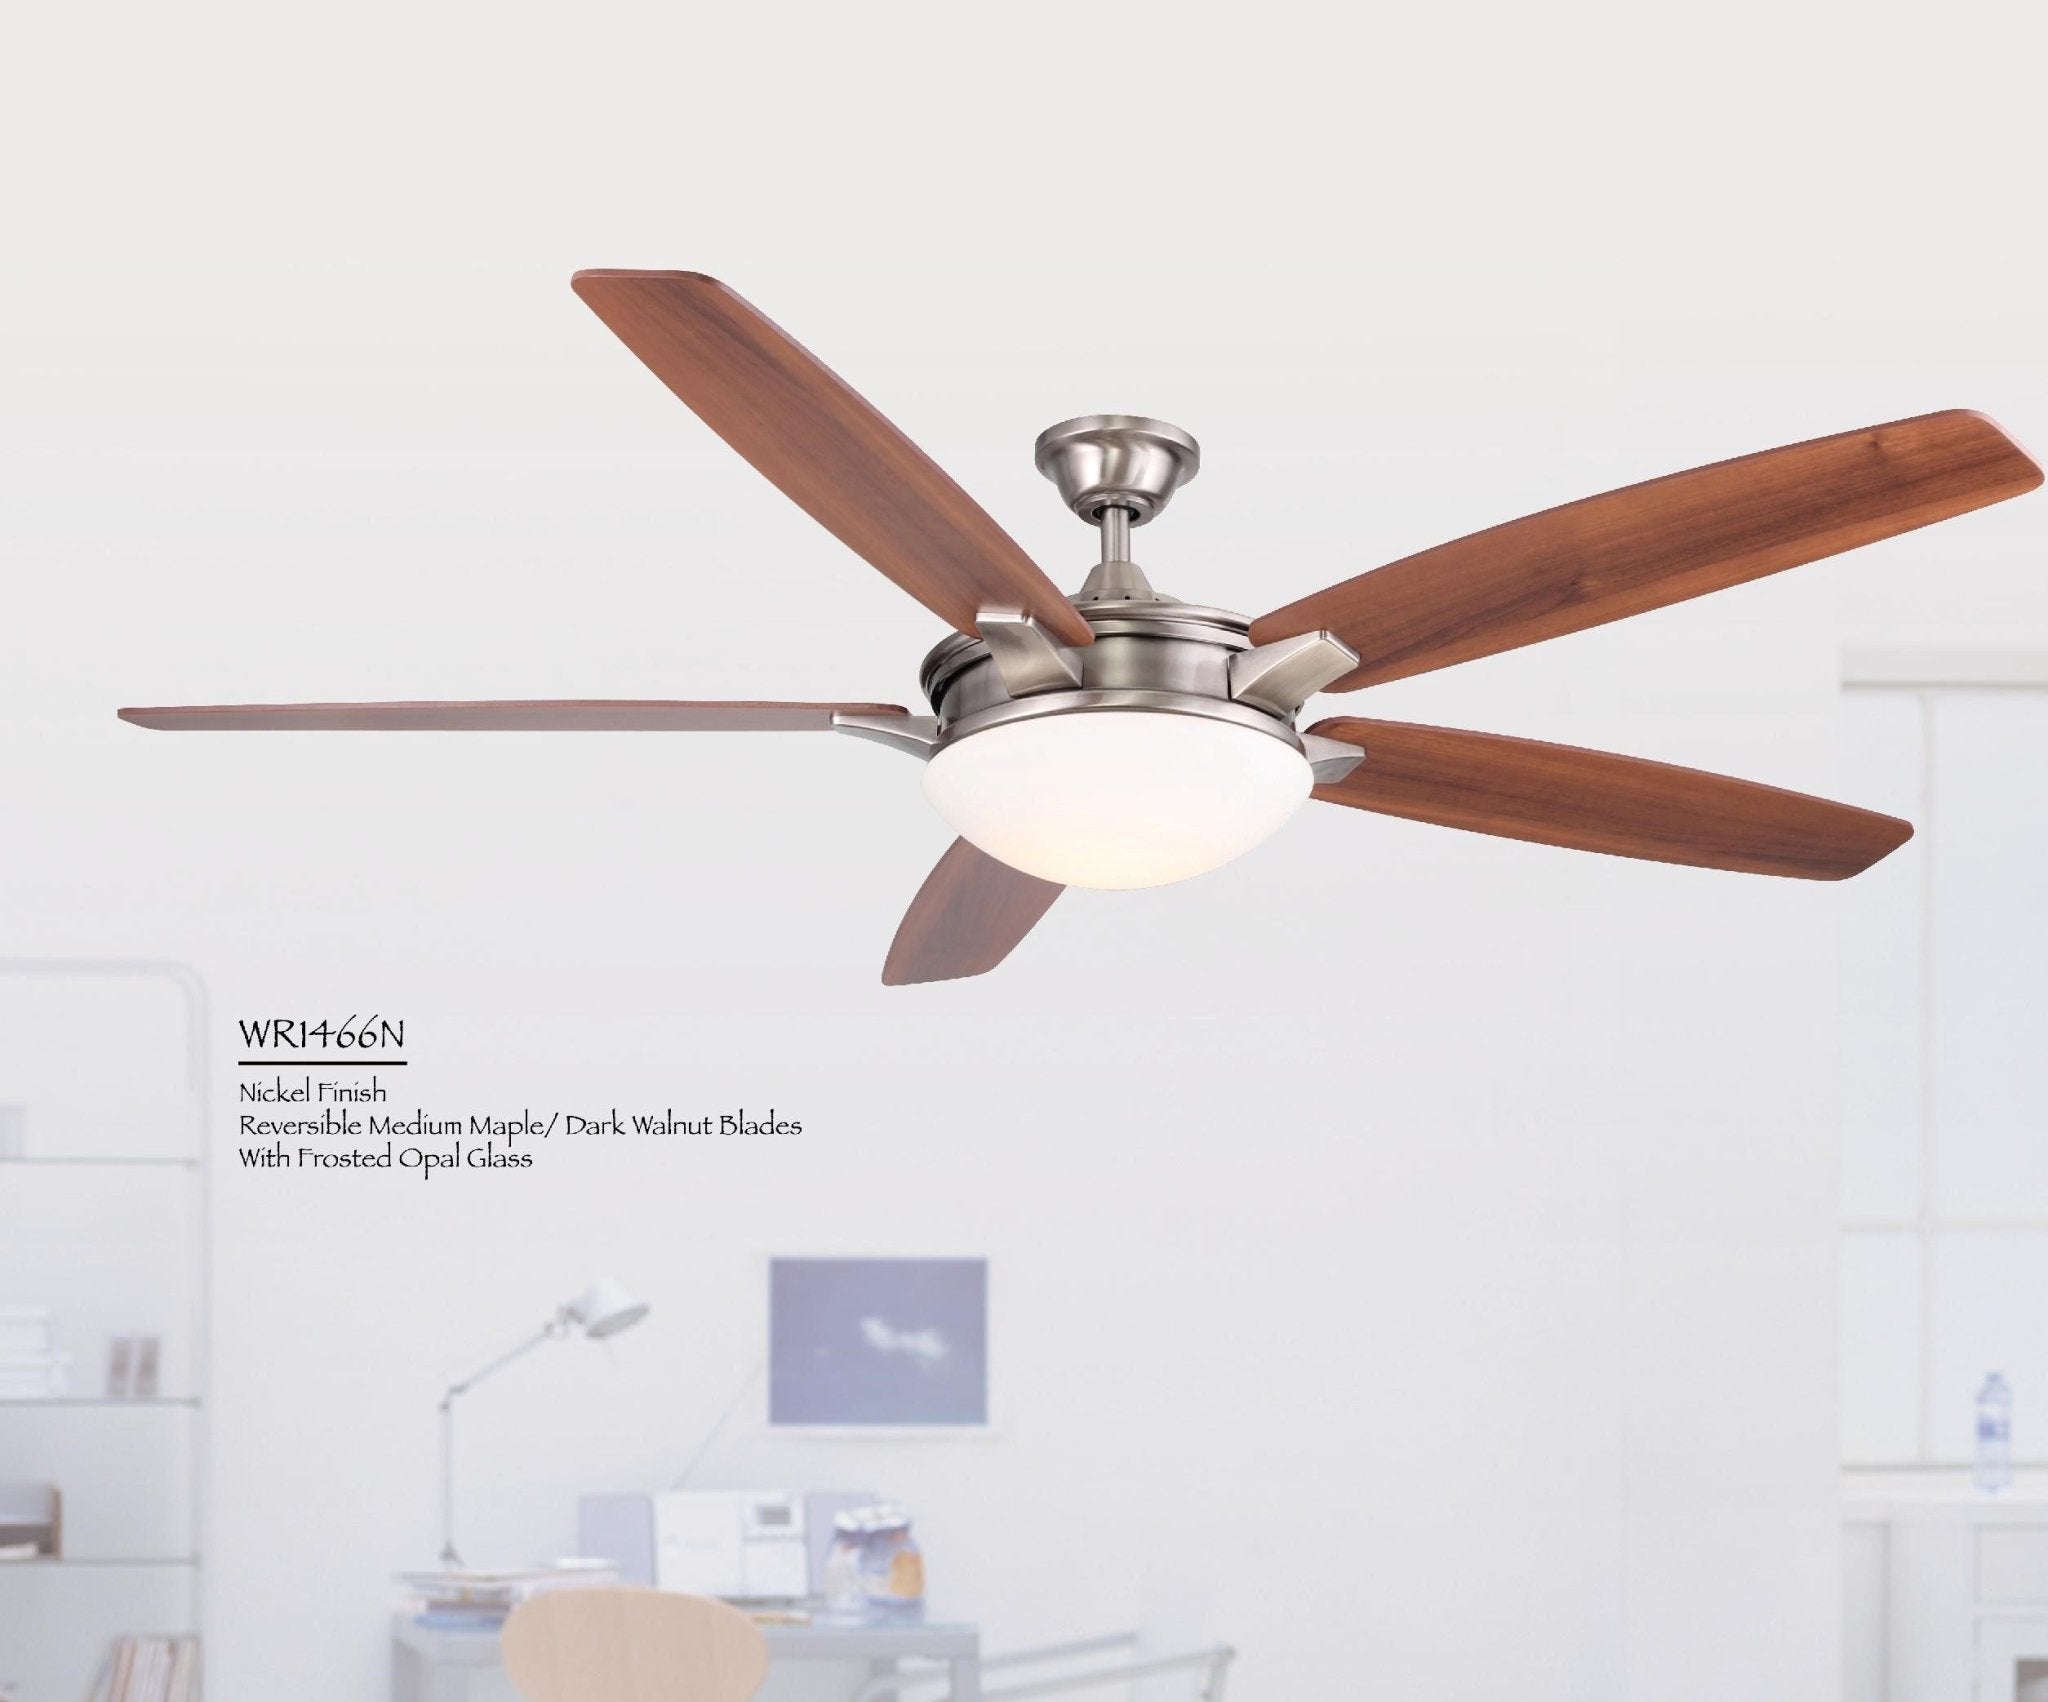 How to make a ceiling fan light brighter